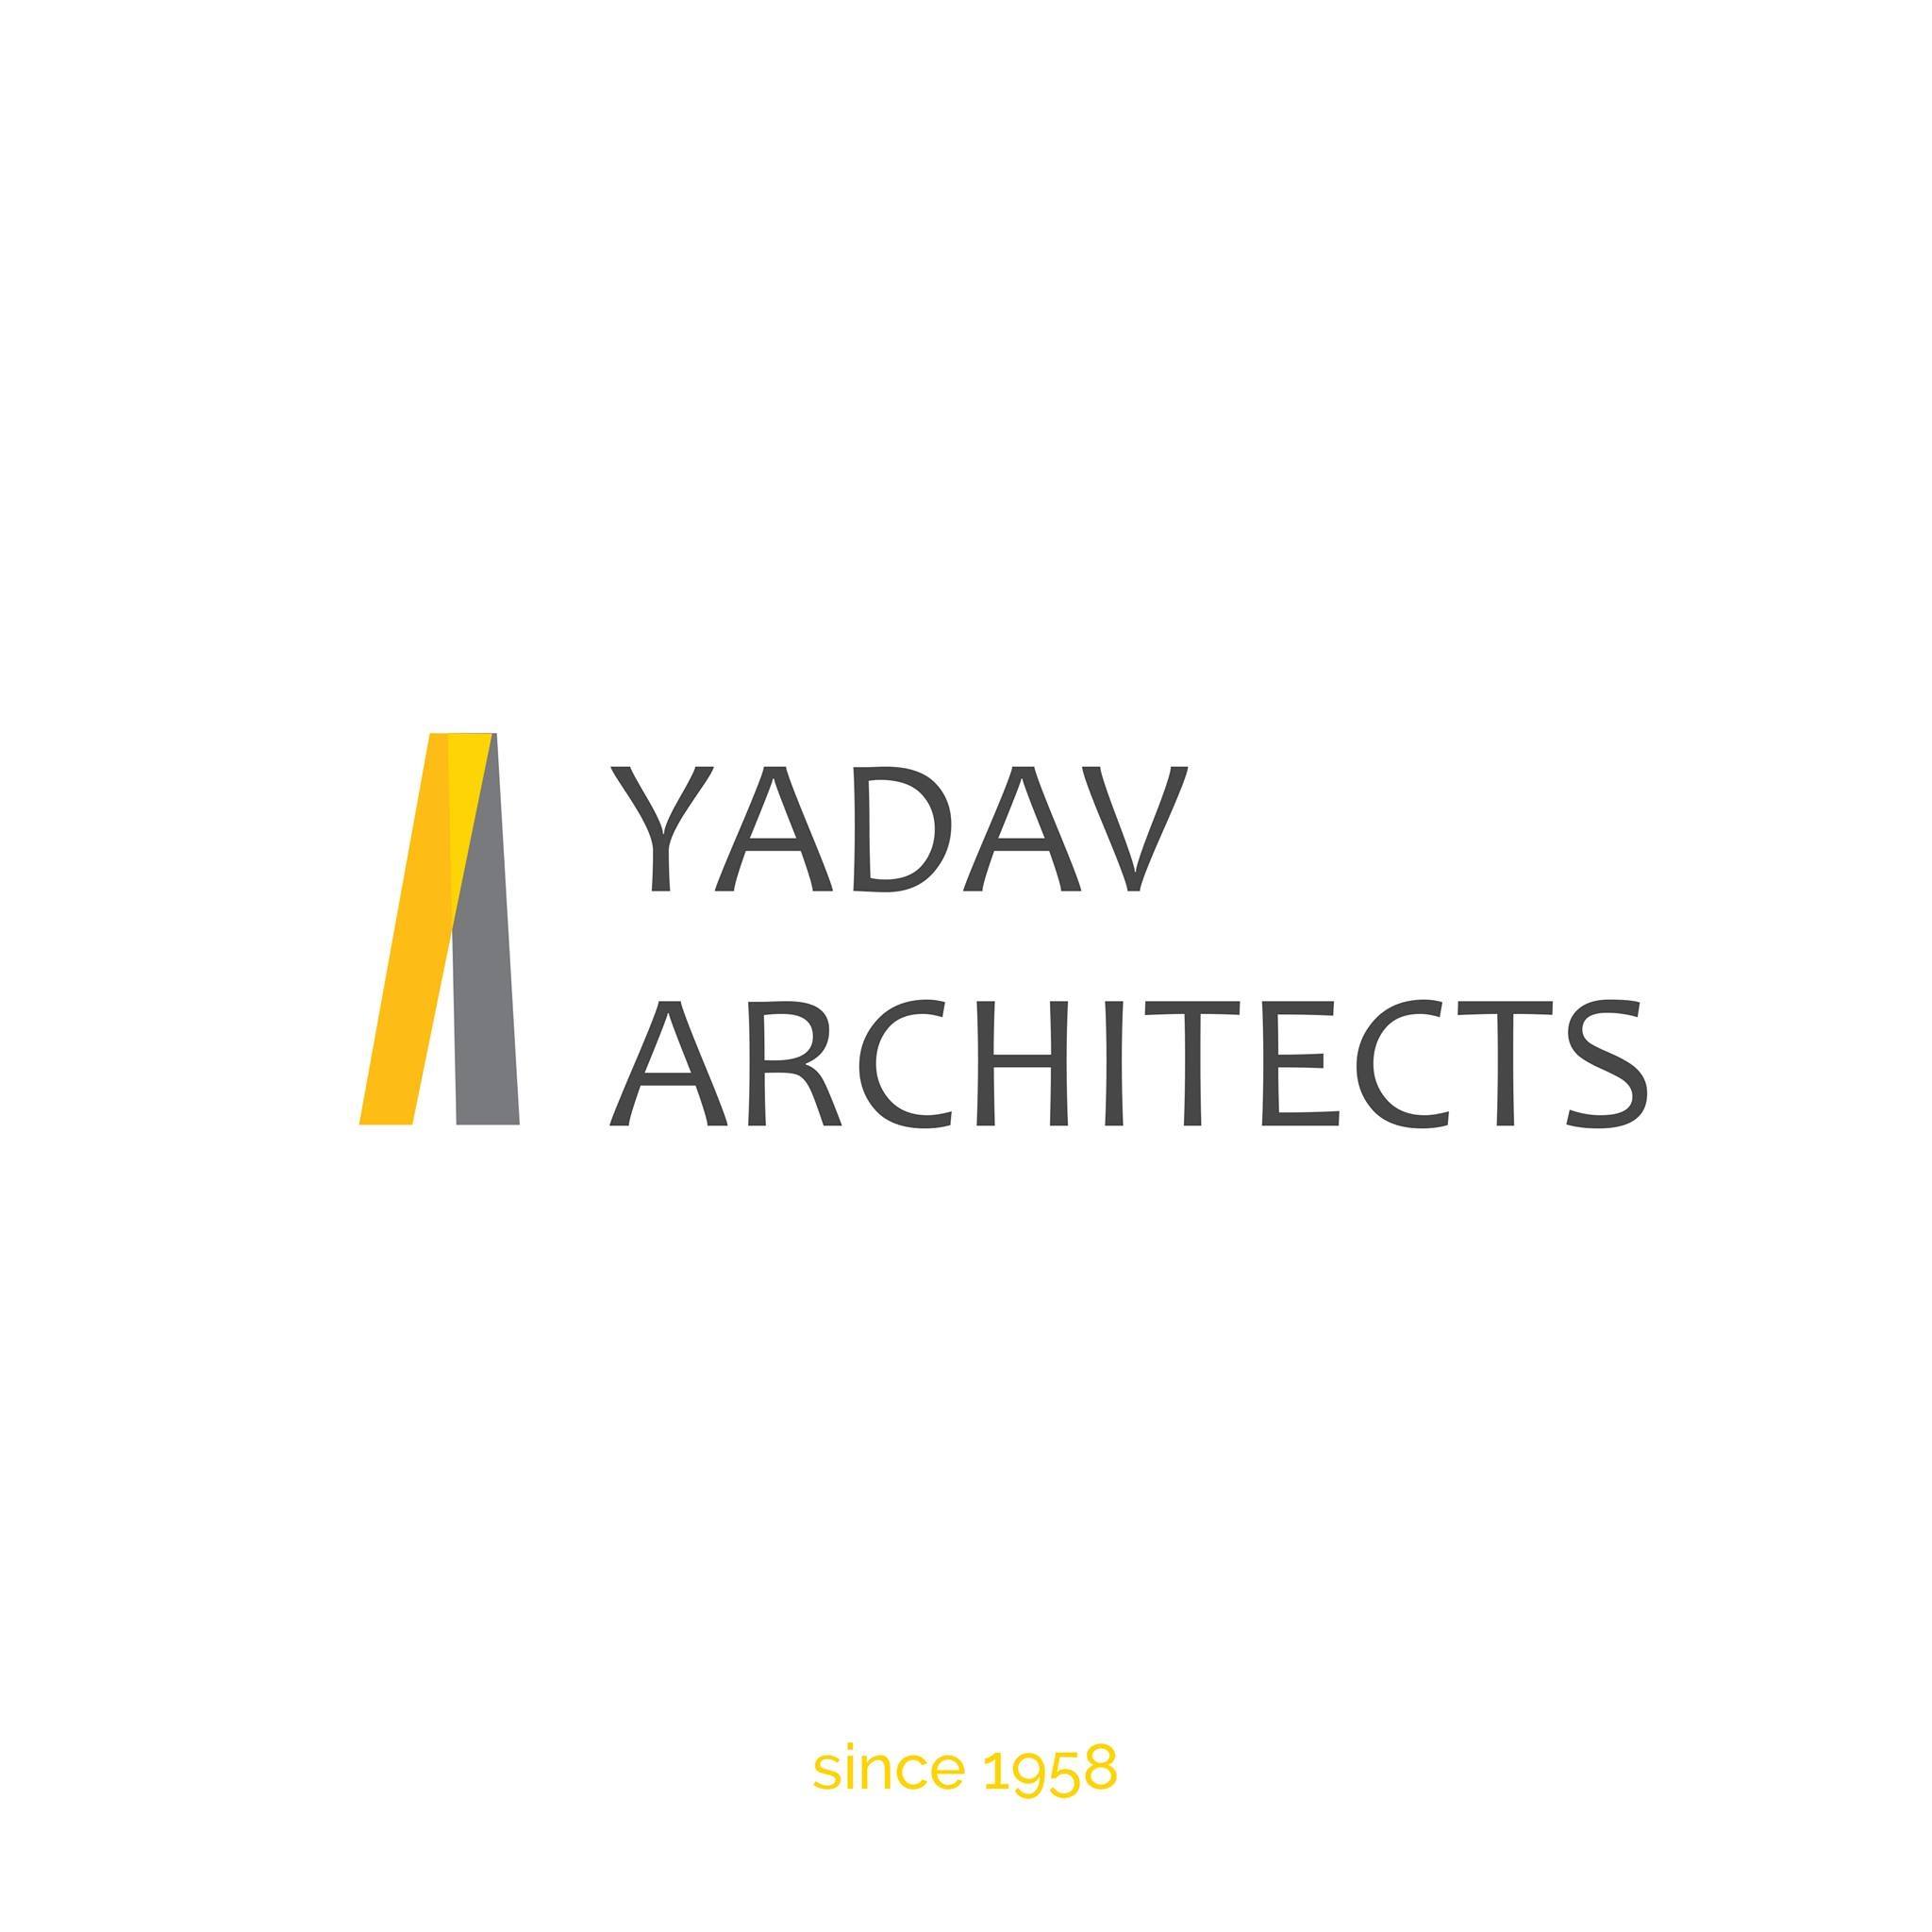 Yadav Architects|Legal Services|Professional Services